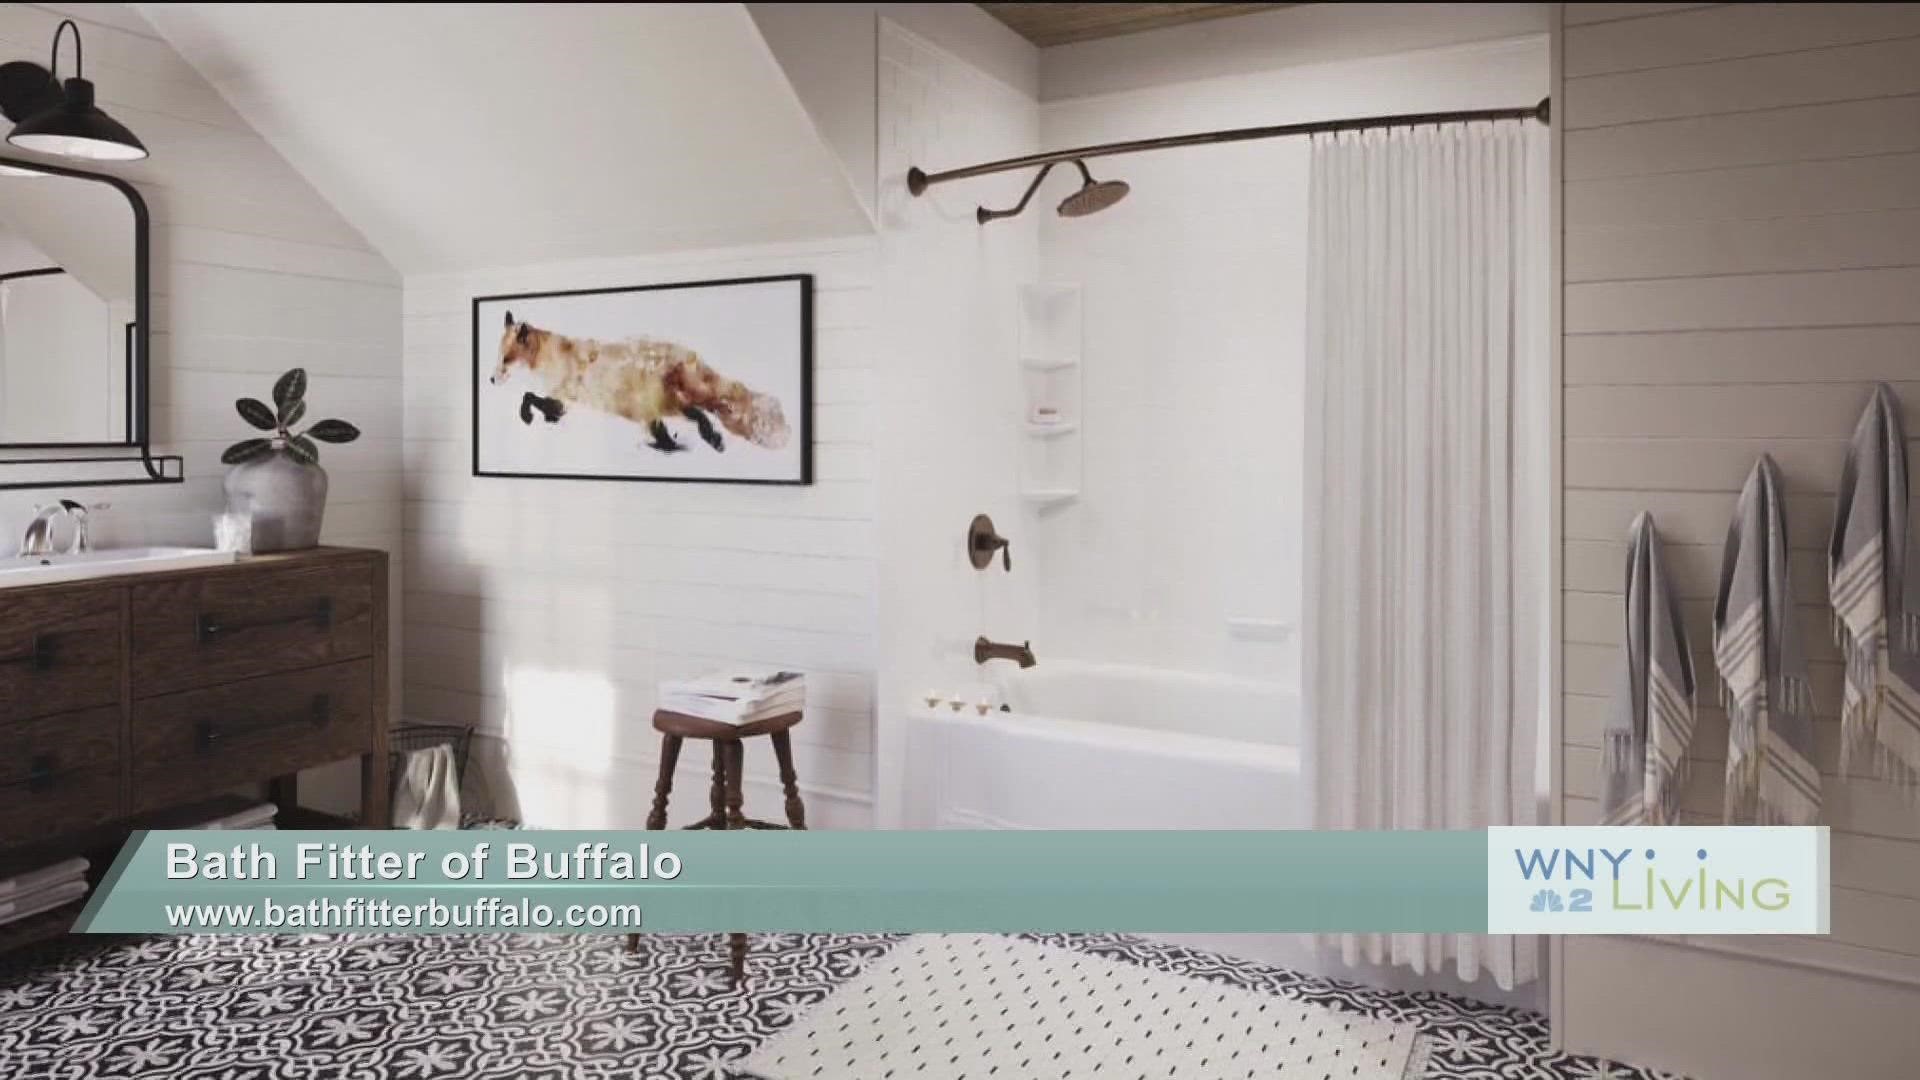 WNY Living - August 13 - Bath Fitter of Buffalo (THIS VIDEO IS SPONSORED BY BATH FITTER OF BUFFALO)